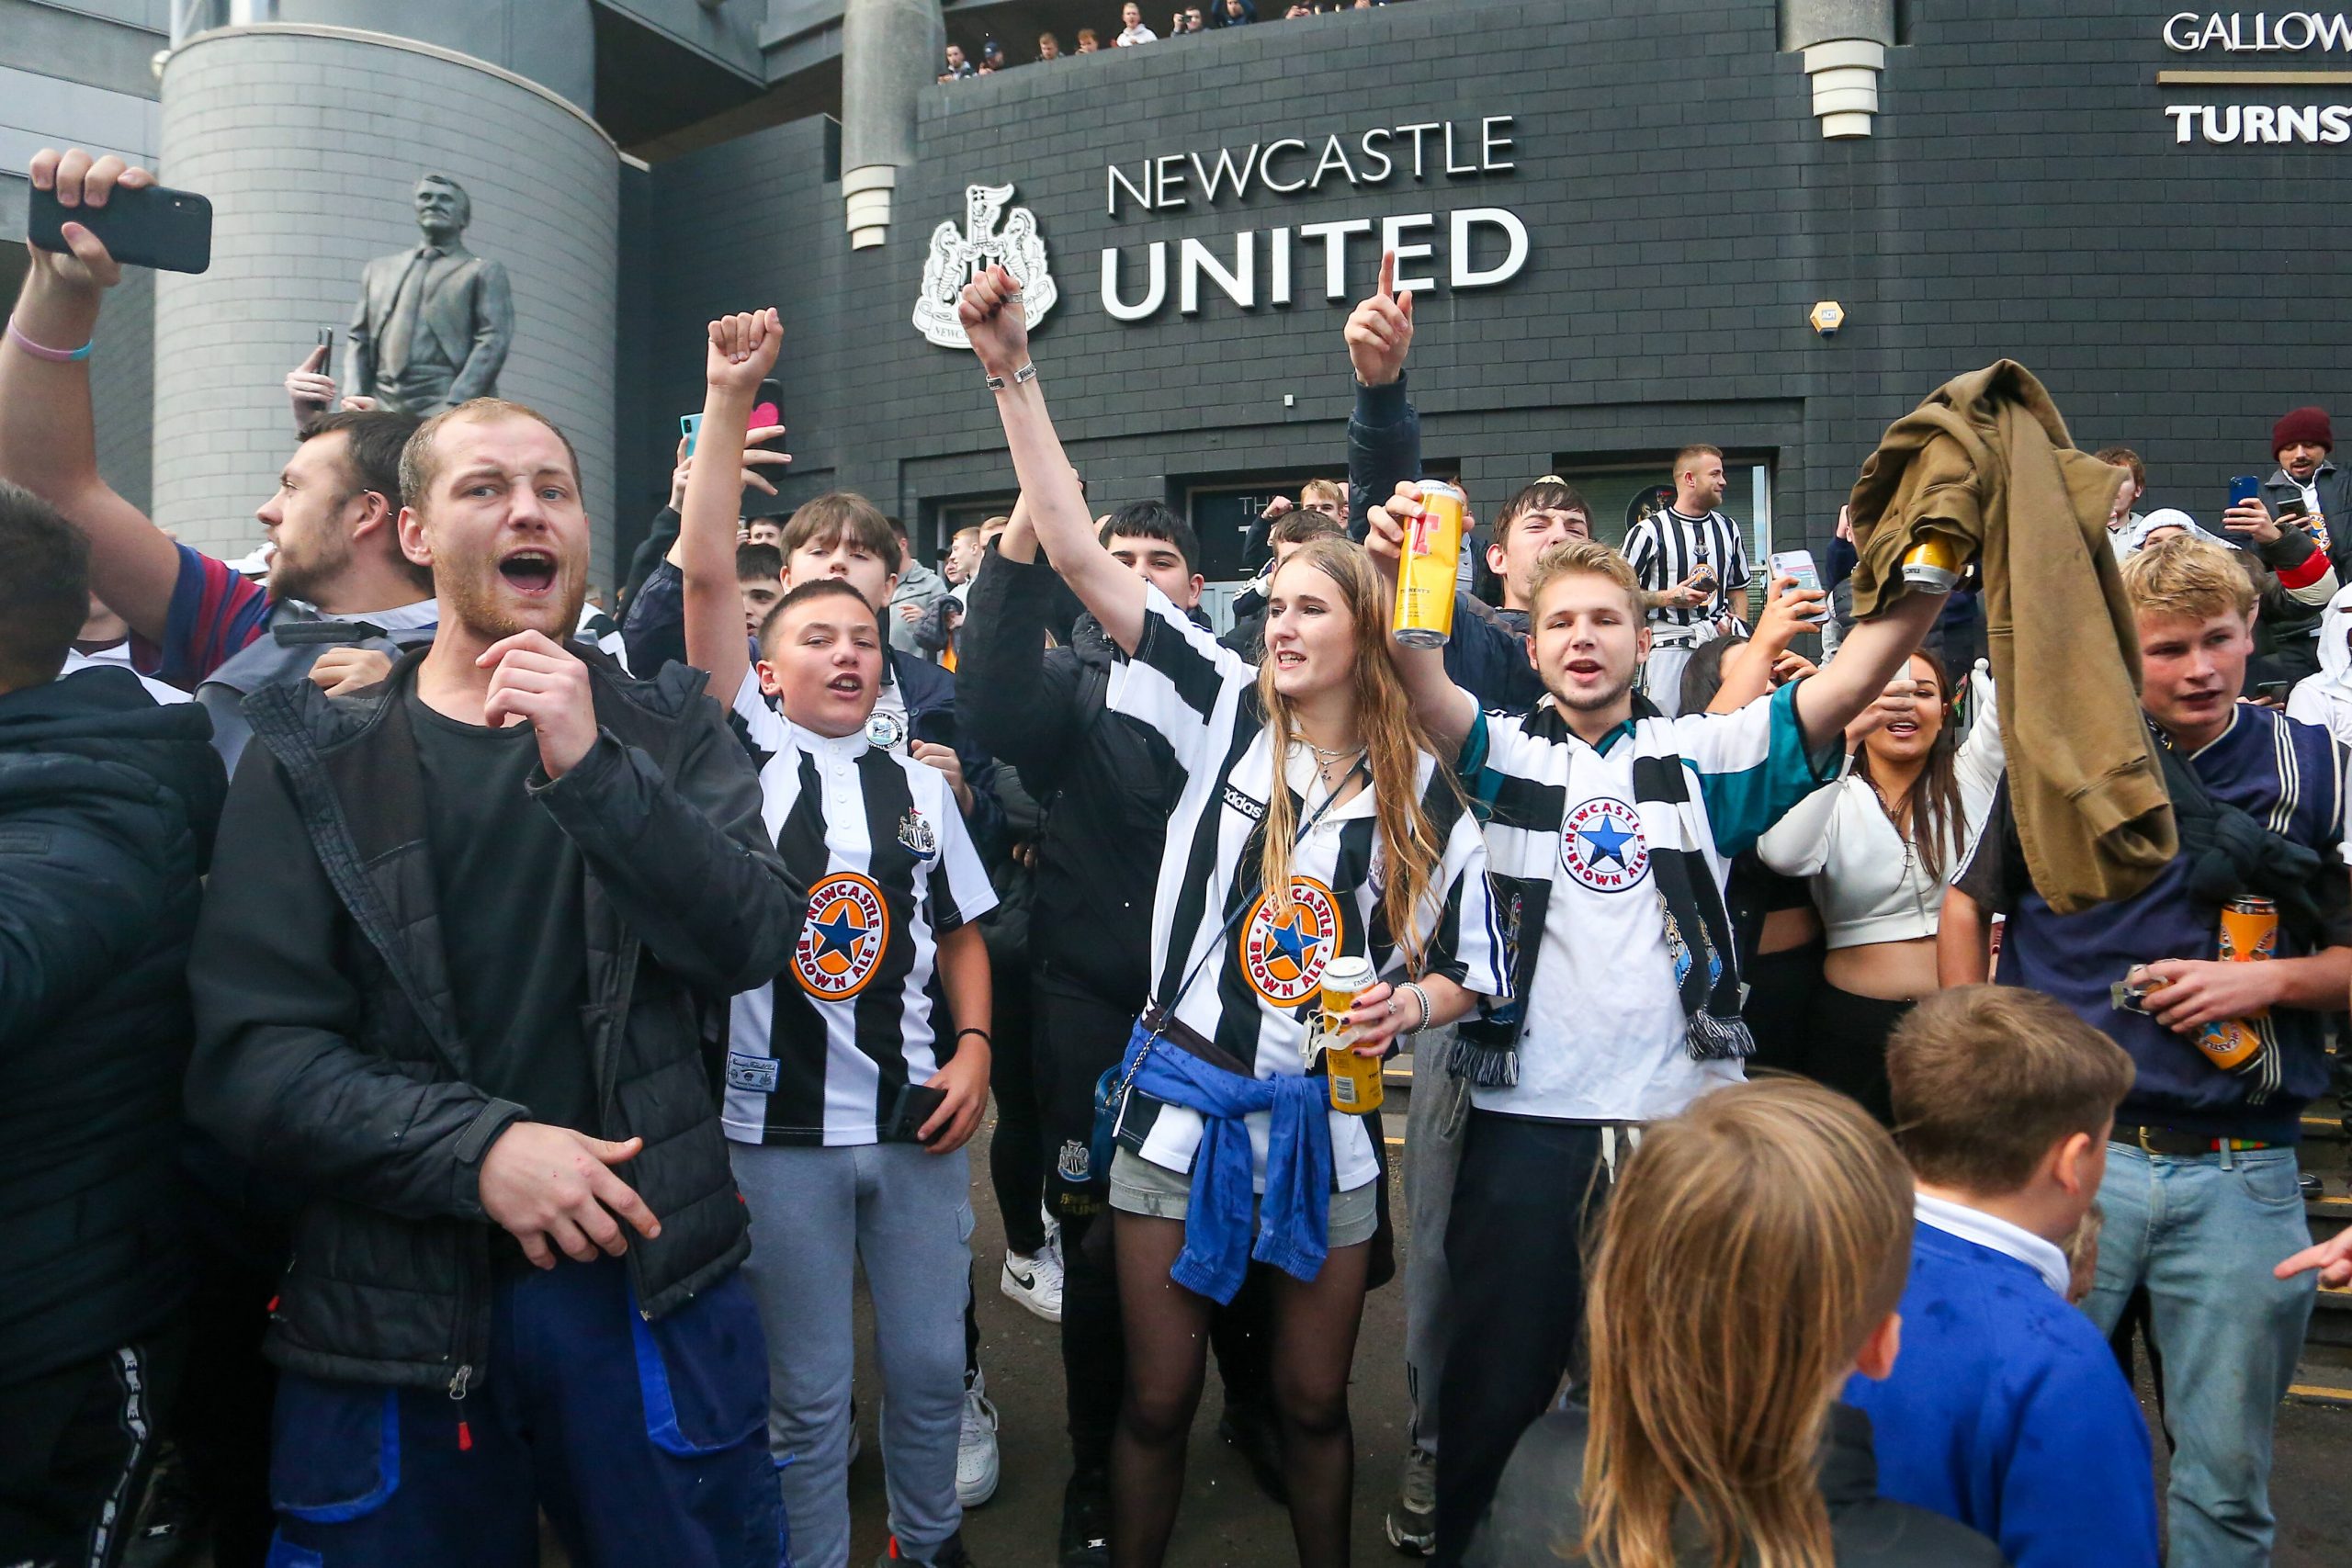 The fans celebrate in front of the Newcastle United Stadium